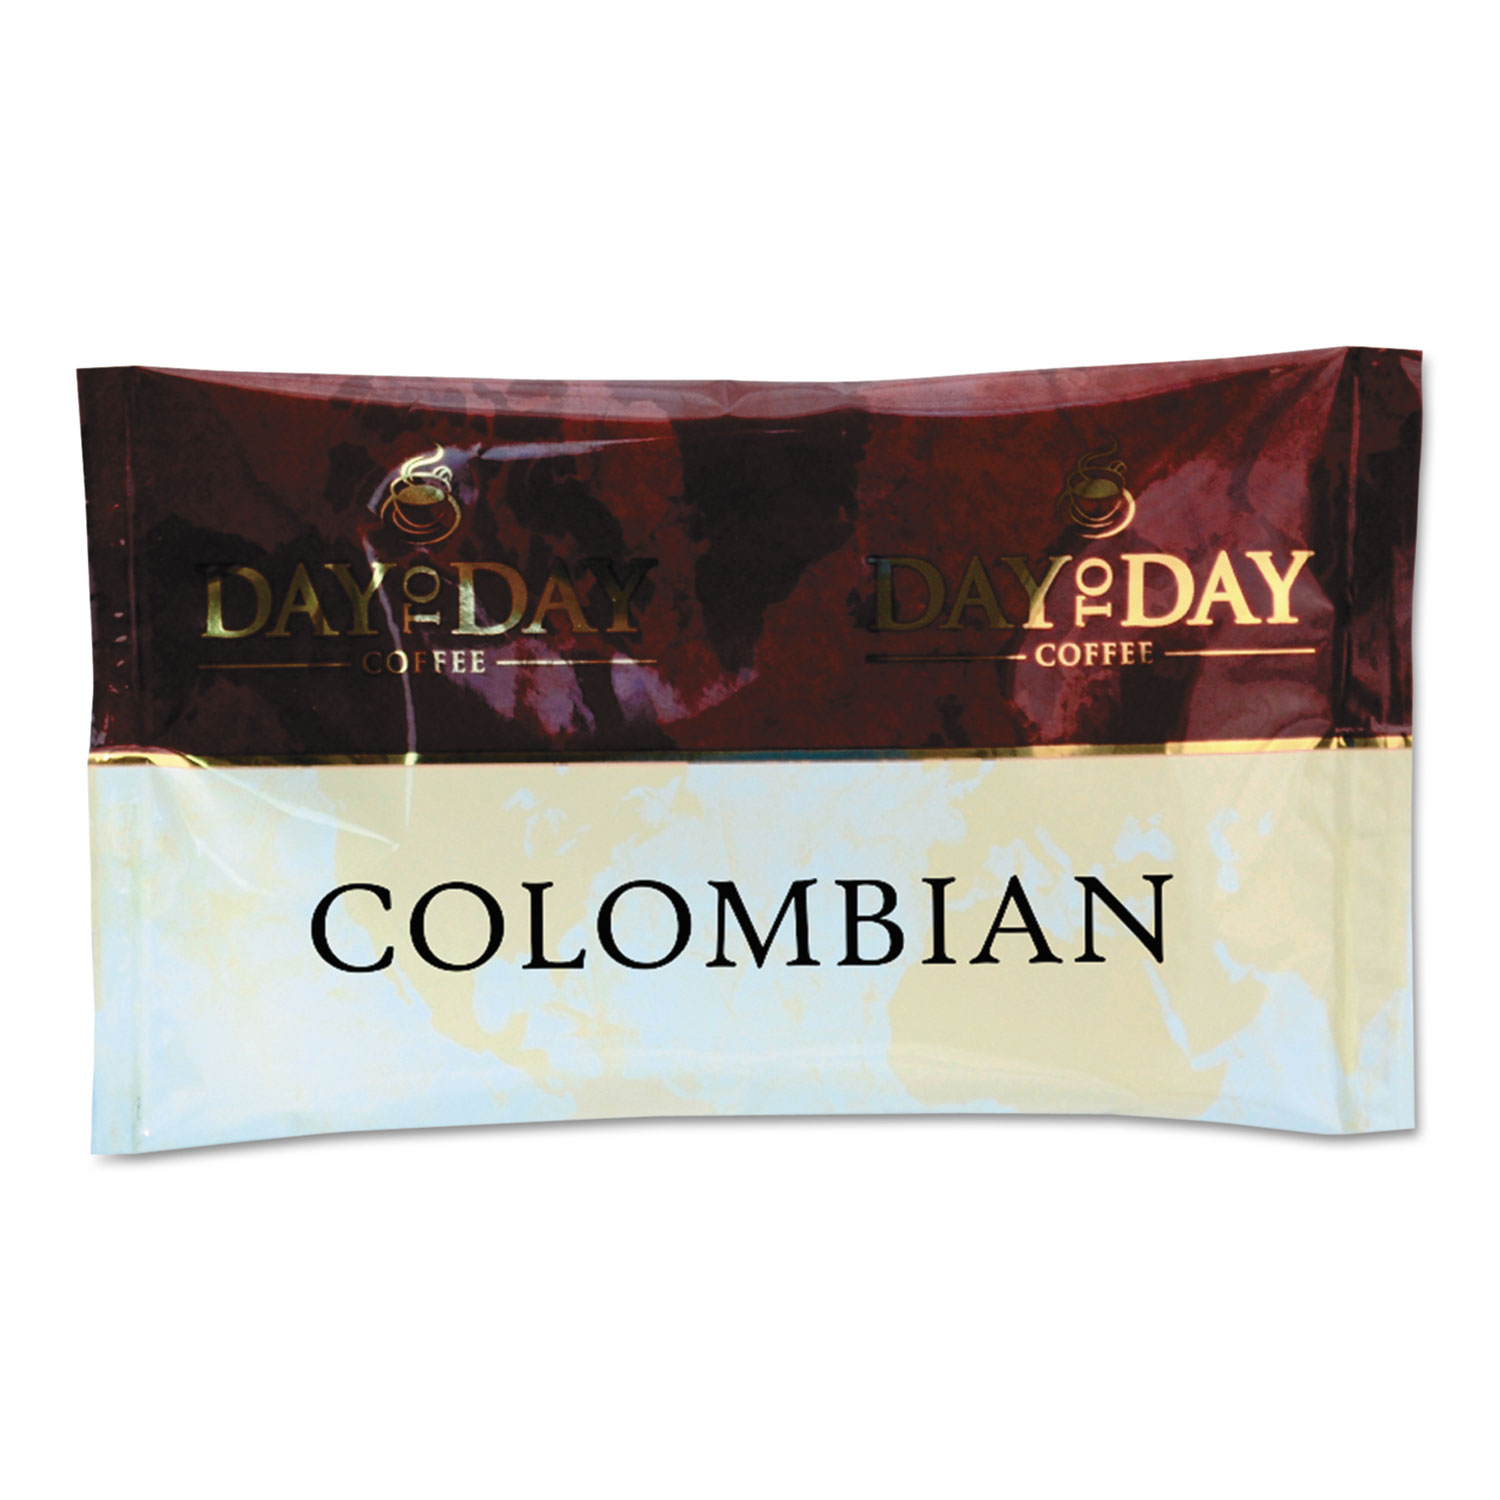  Day to Day Coffee PCO23001 100% Pure Coffee, Colombian Blend, 1.5 oz Pack, 42 Packs/Carton (PCO23001) 